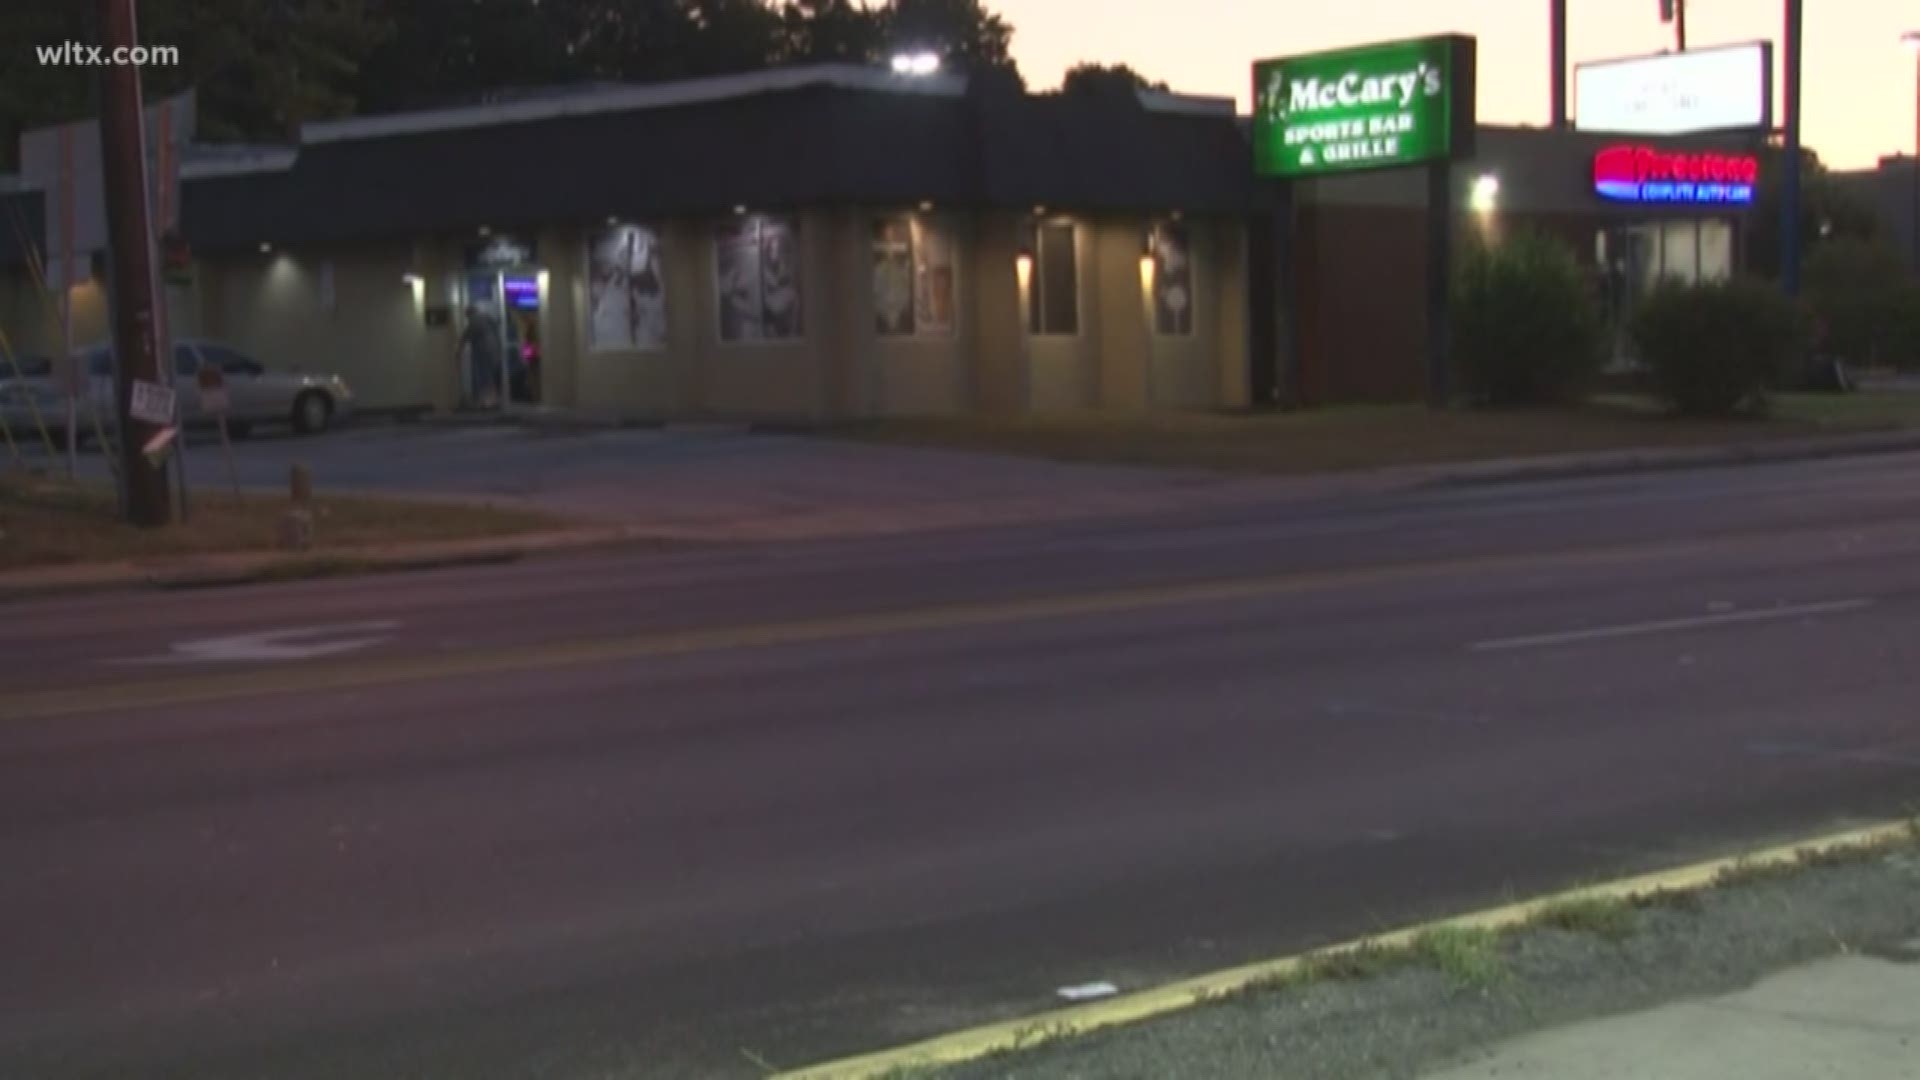 One person was killed and three others were injured after a shooting early Thursday morning at McCary's Bar and Grill on Bush River Road.